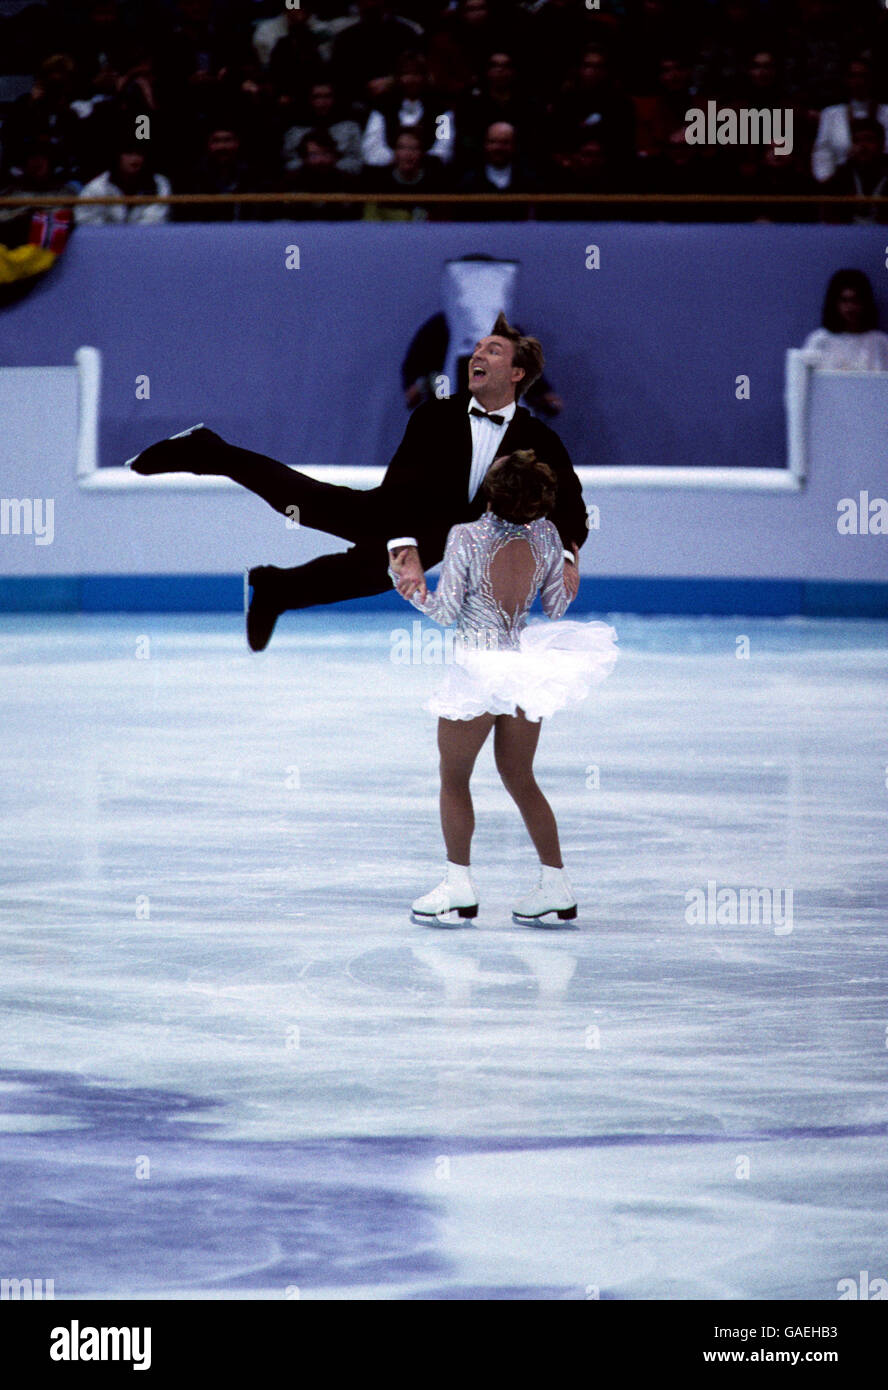 Winter Olympic Games 1994 - Lillehammer. Great Britain's Jayne Torvill and Christopher Dean compete in the Ice Dancing Final where they achieved a Bronze medal. Stock Photo